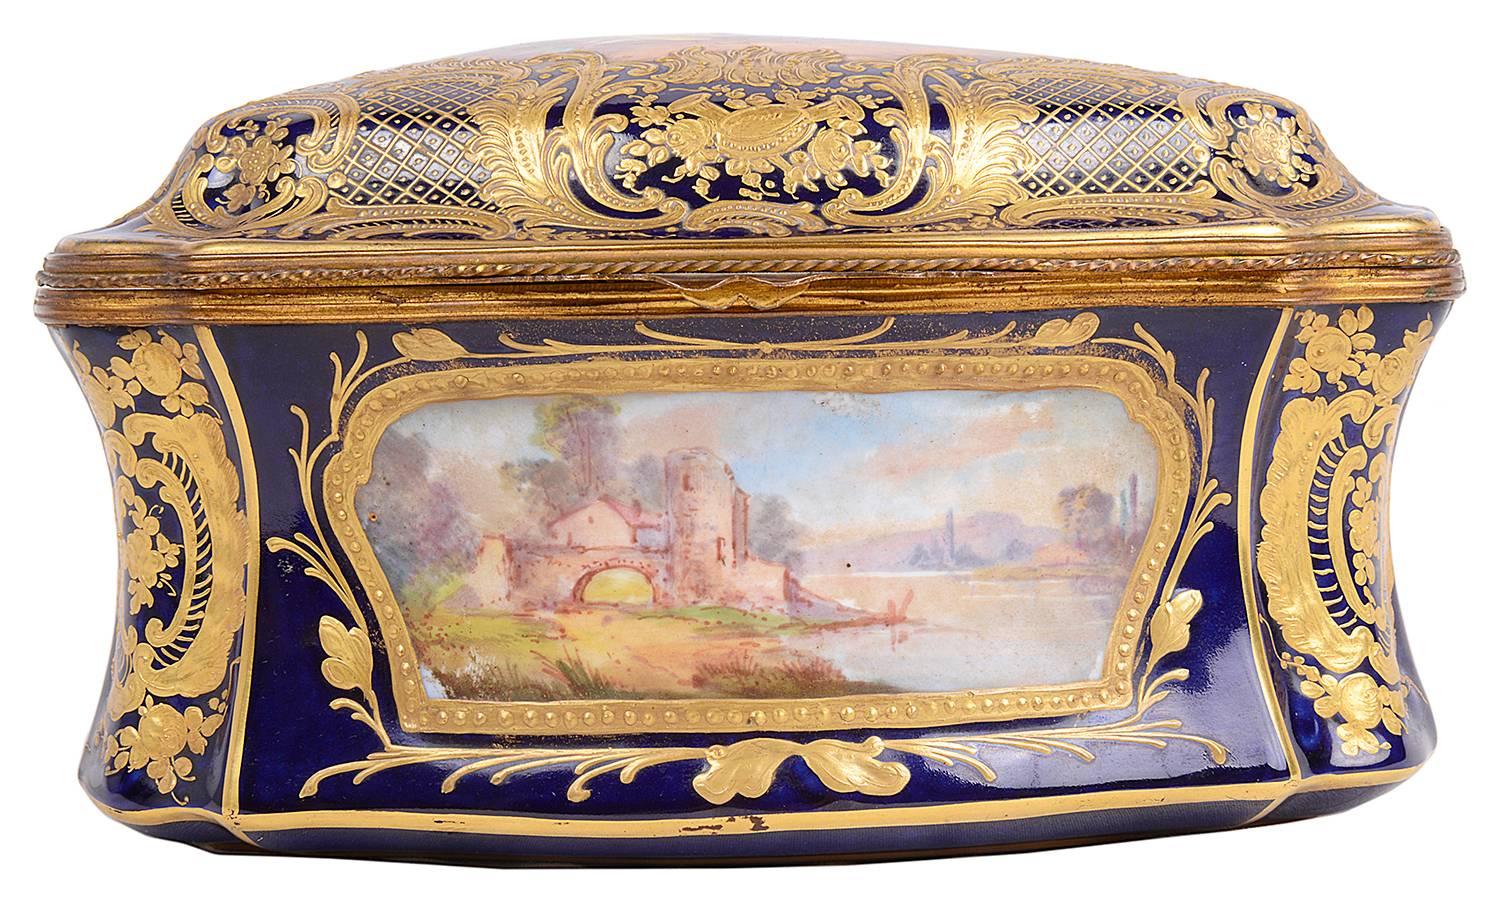 A good quality 19th century French porcelain 'Sevres' style porcelain casket. Having cobalt blue borders with gilded scrolling decoration. Inset painted panels, depicting a romantic and rural scenes. The lid opening to reveal a velvet lined